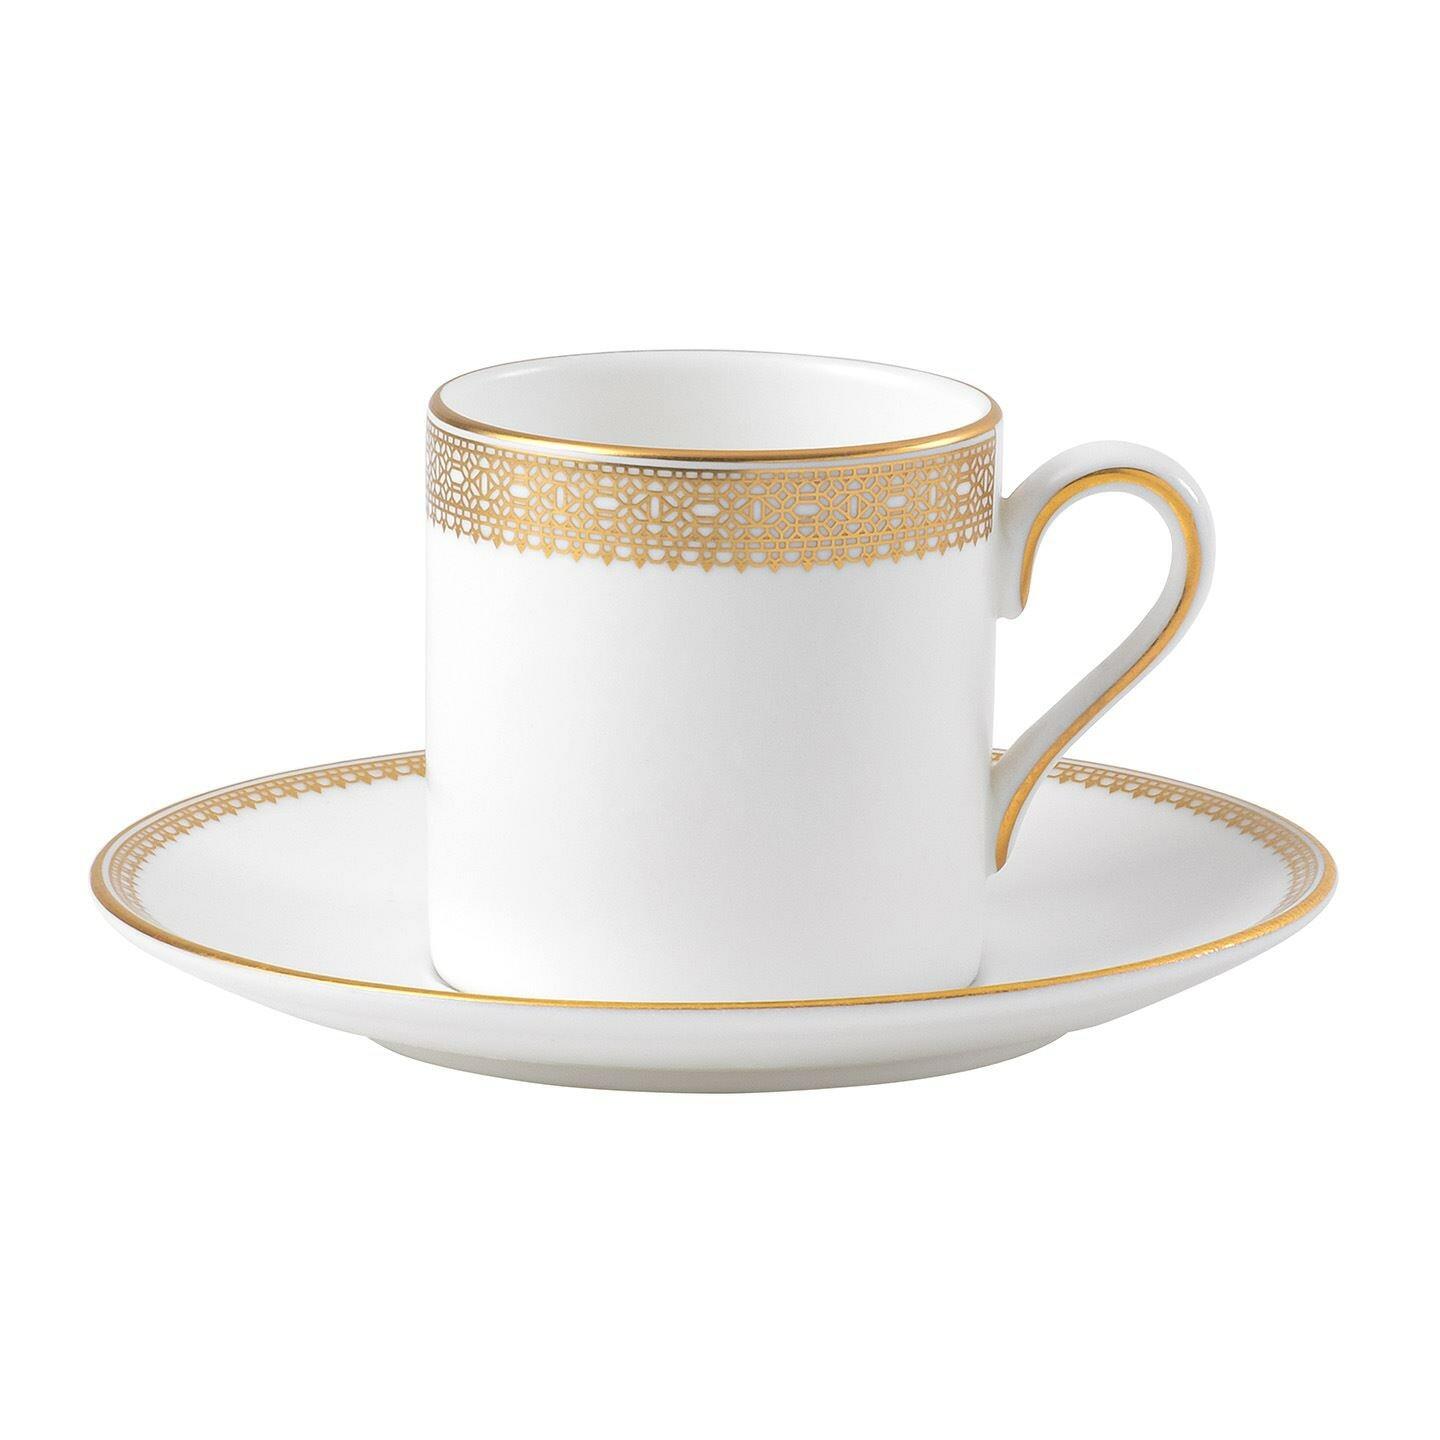 Wedgwood Vera Wang Lace Gold Coffee Cup & Saucer